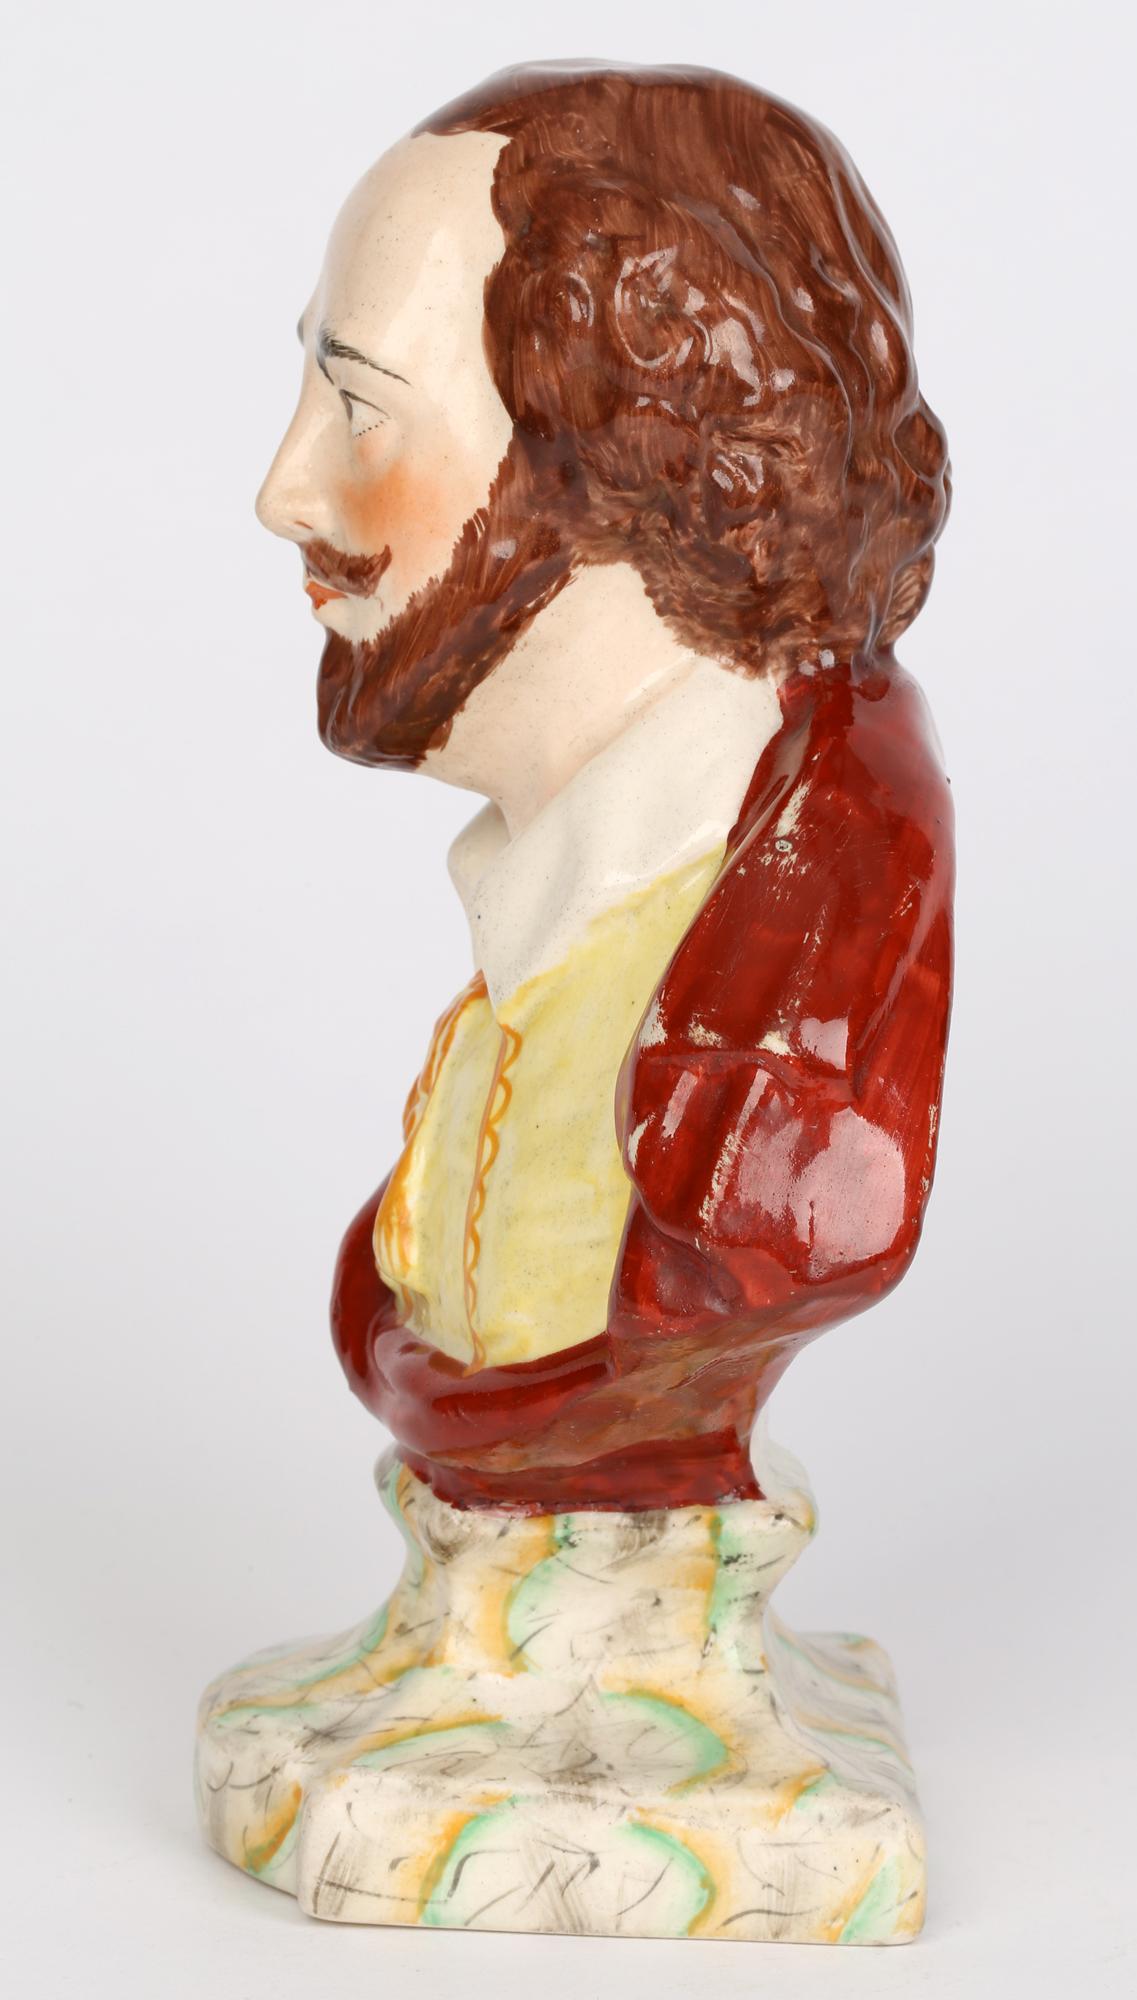 English, Probably Leeds Hand Painted Pottery Bust of William Shakespeare 6